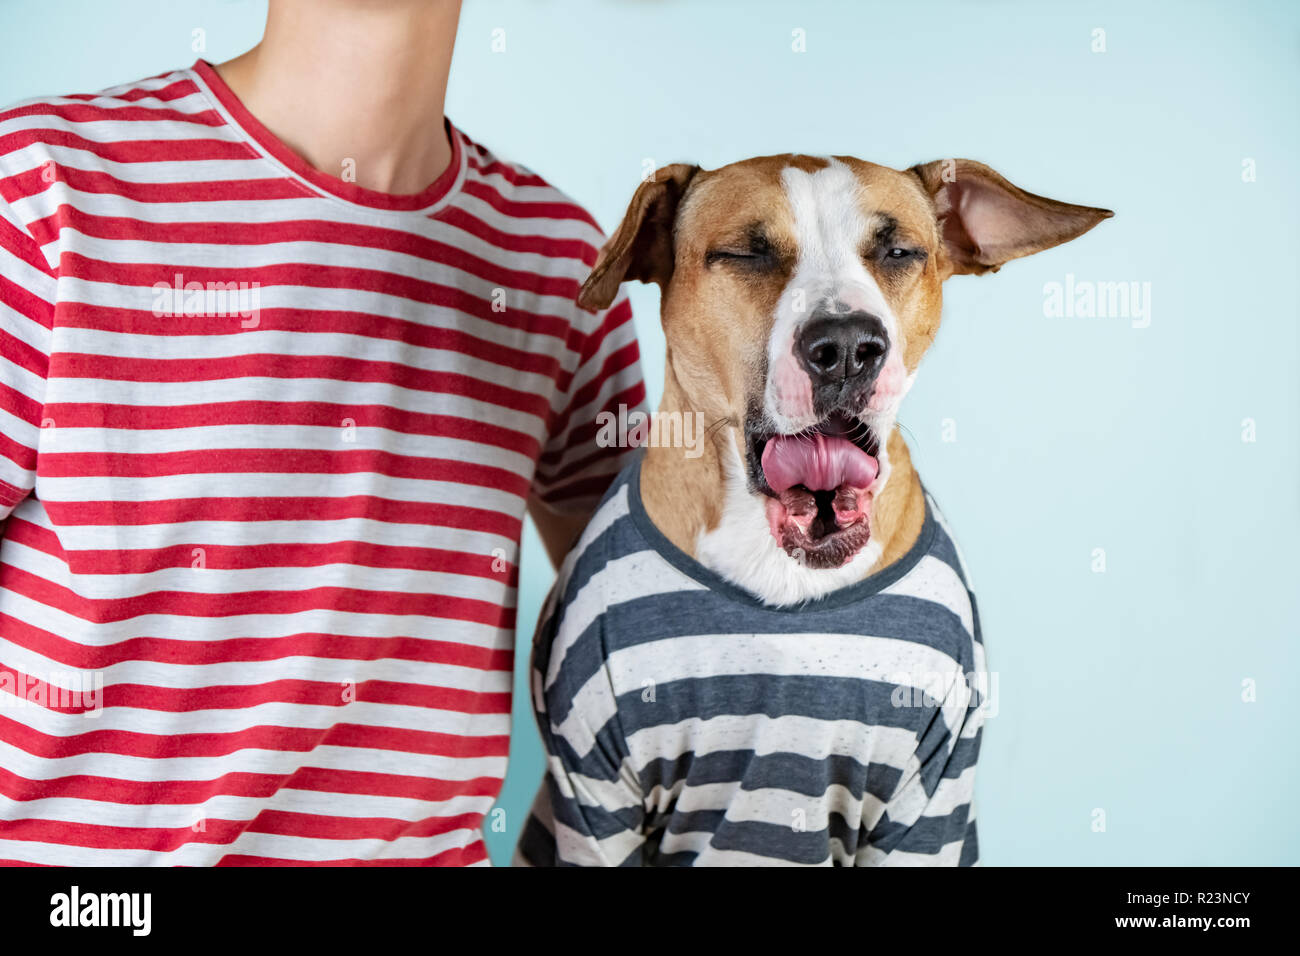 Funny yawning dog and owner in similar clothes. Sleepy morning idea: puppy and human in same t-shirts in studio background Stock Photo